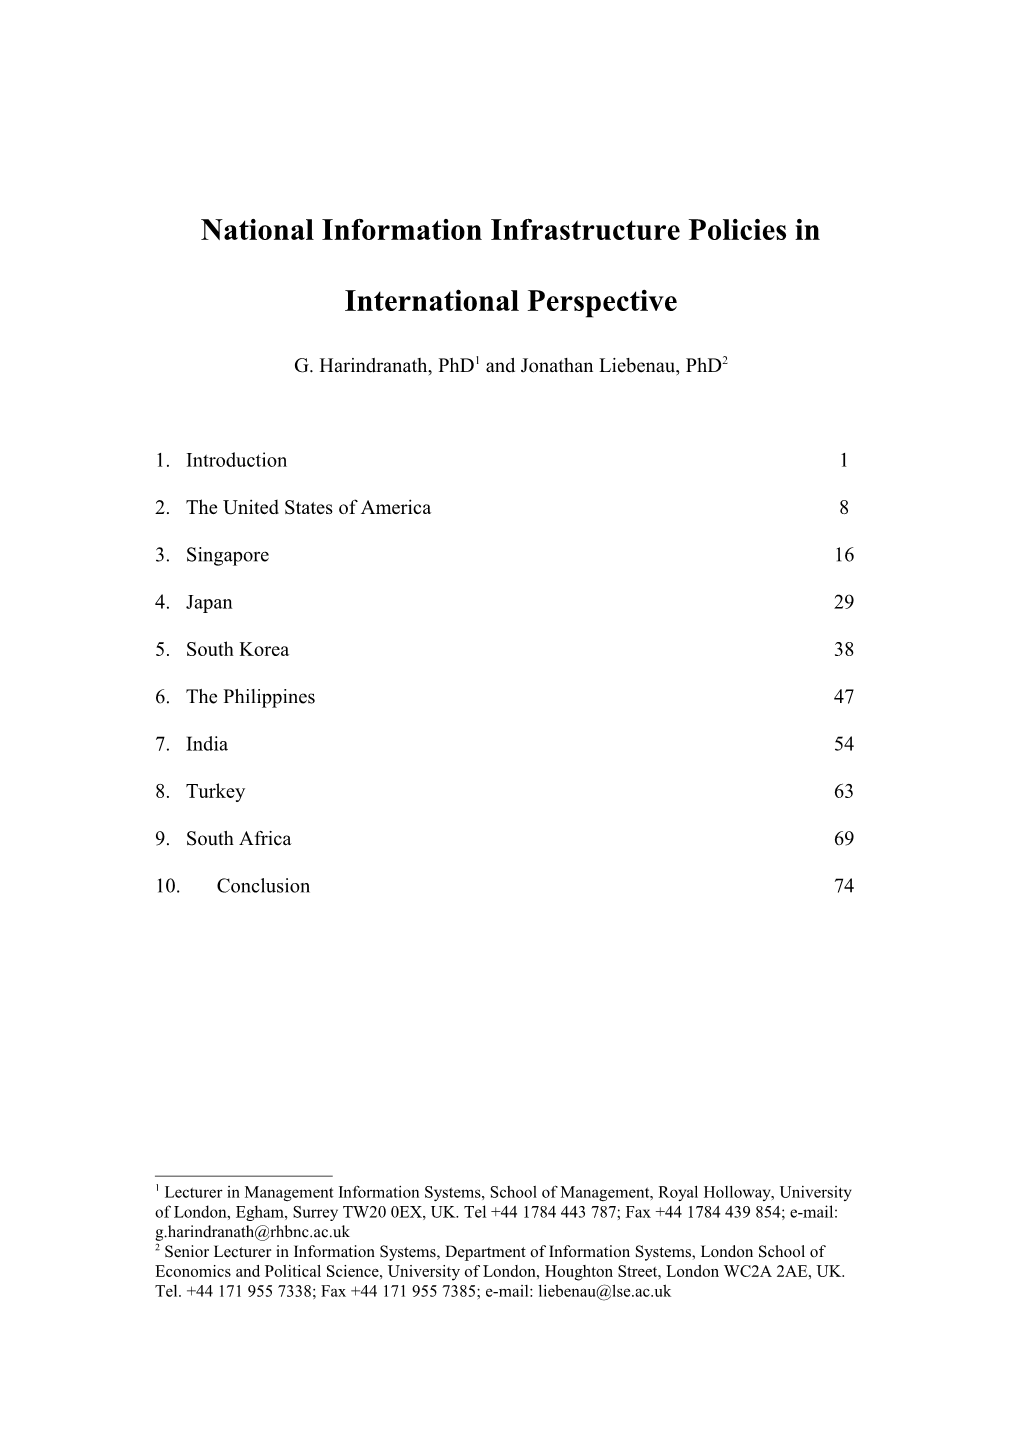 National Information Infrastructure Policies in International Perspective